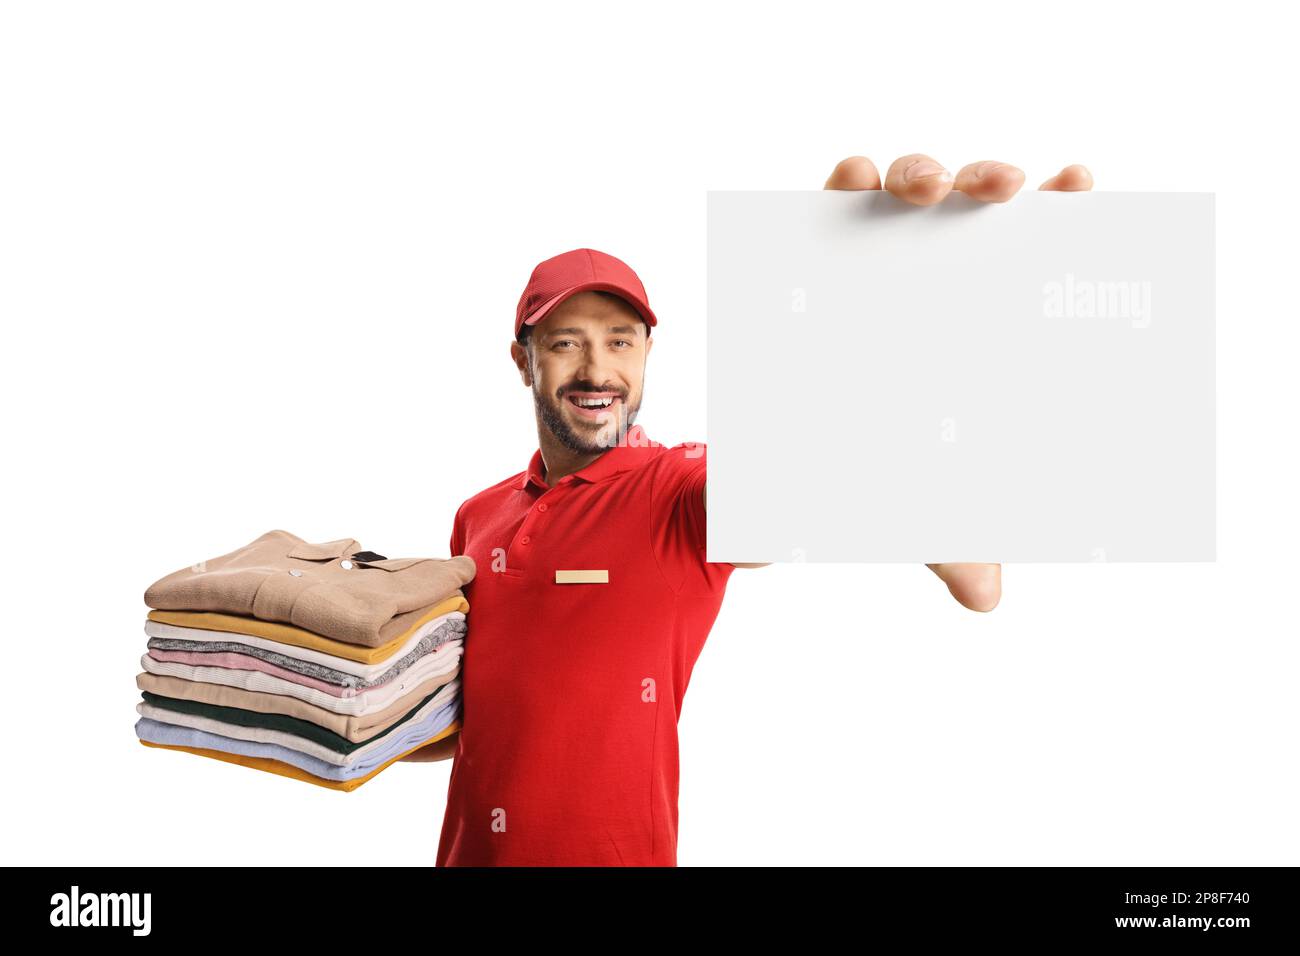 Laundry worker holding a pile of folded clothes and showing a blank card isolated on a white background Stock Photo